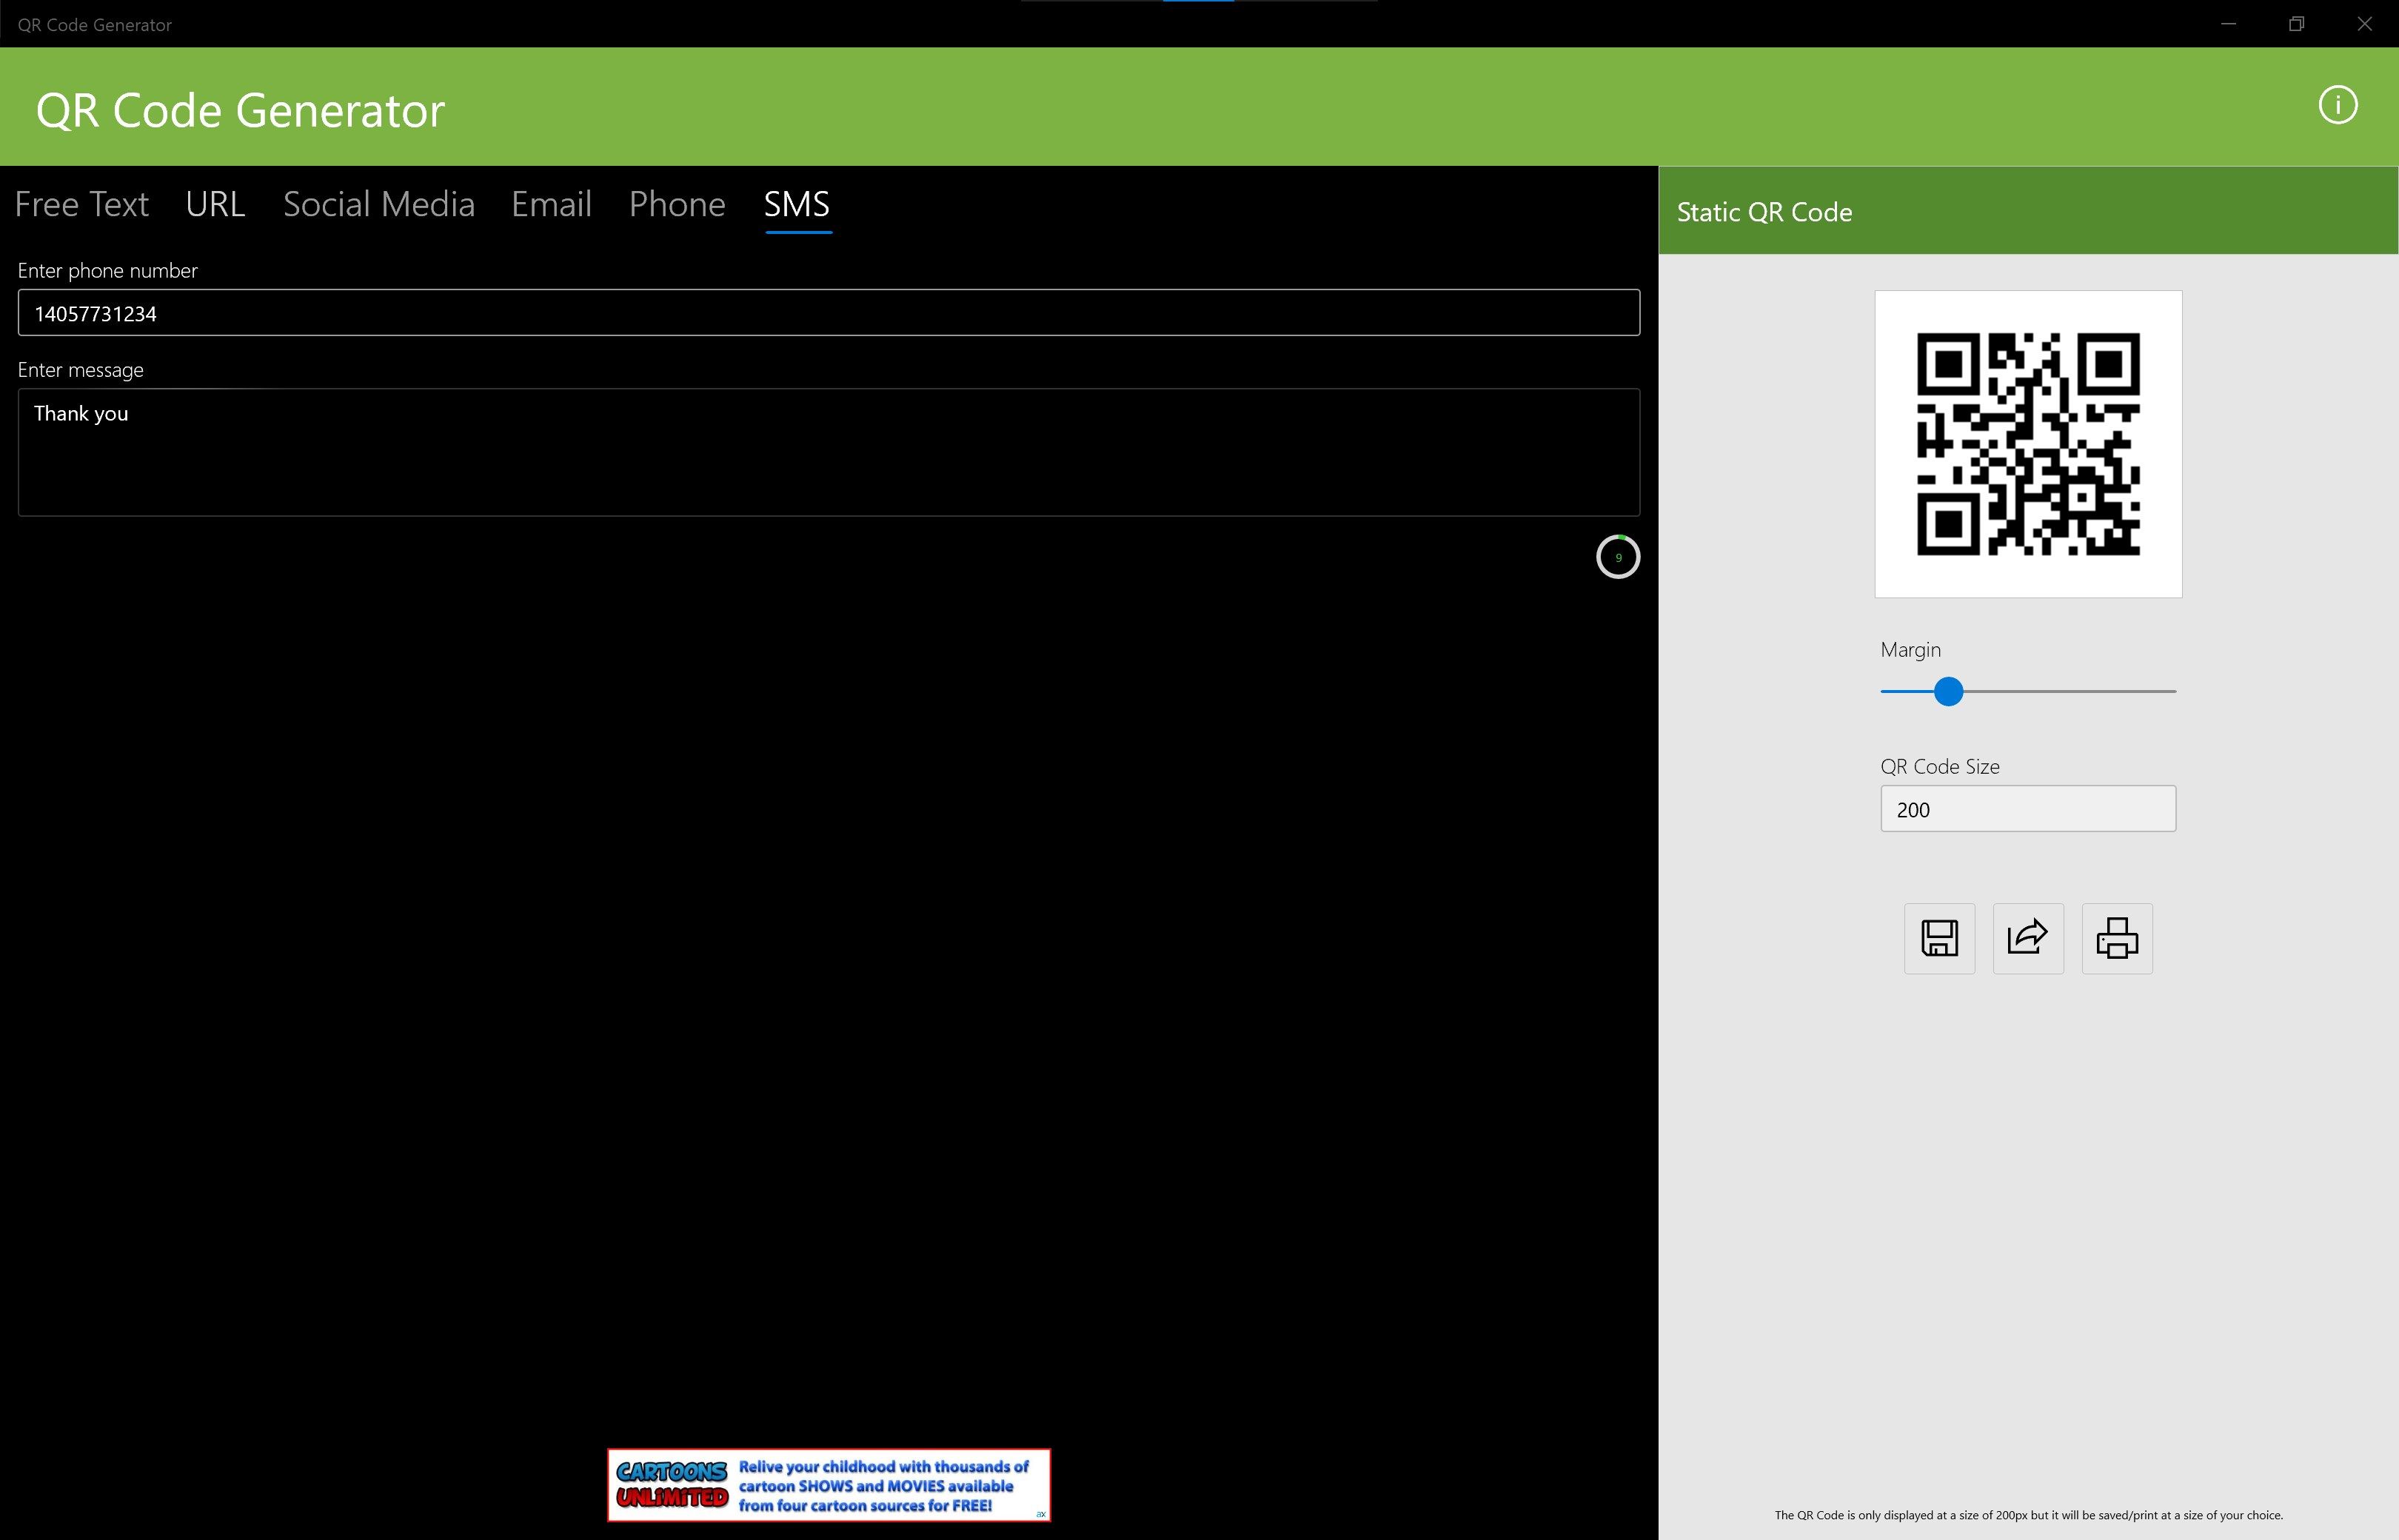 Create an SMS based QR code for your user.